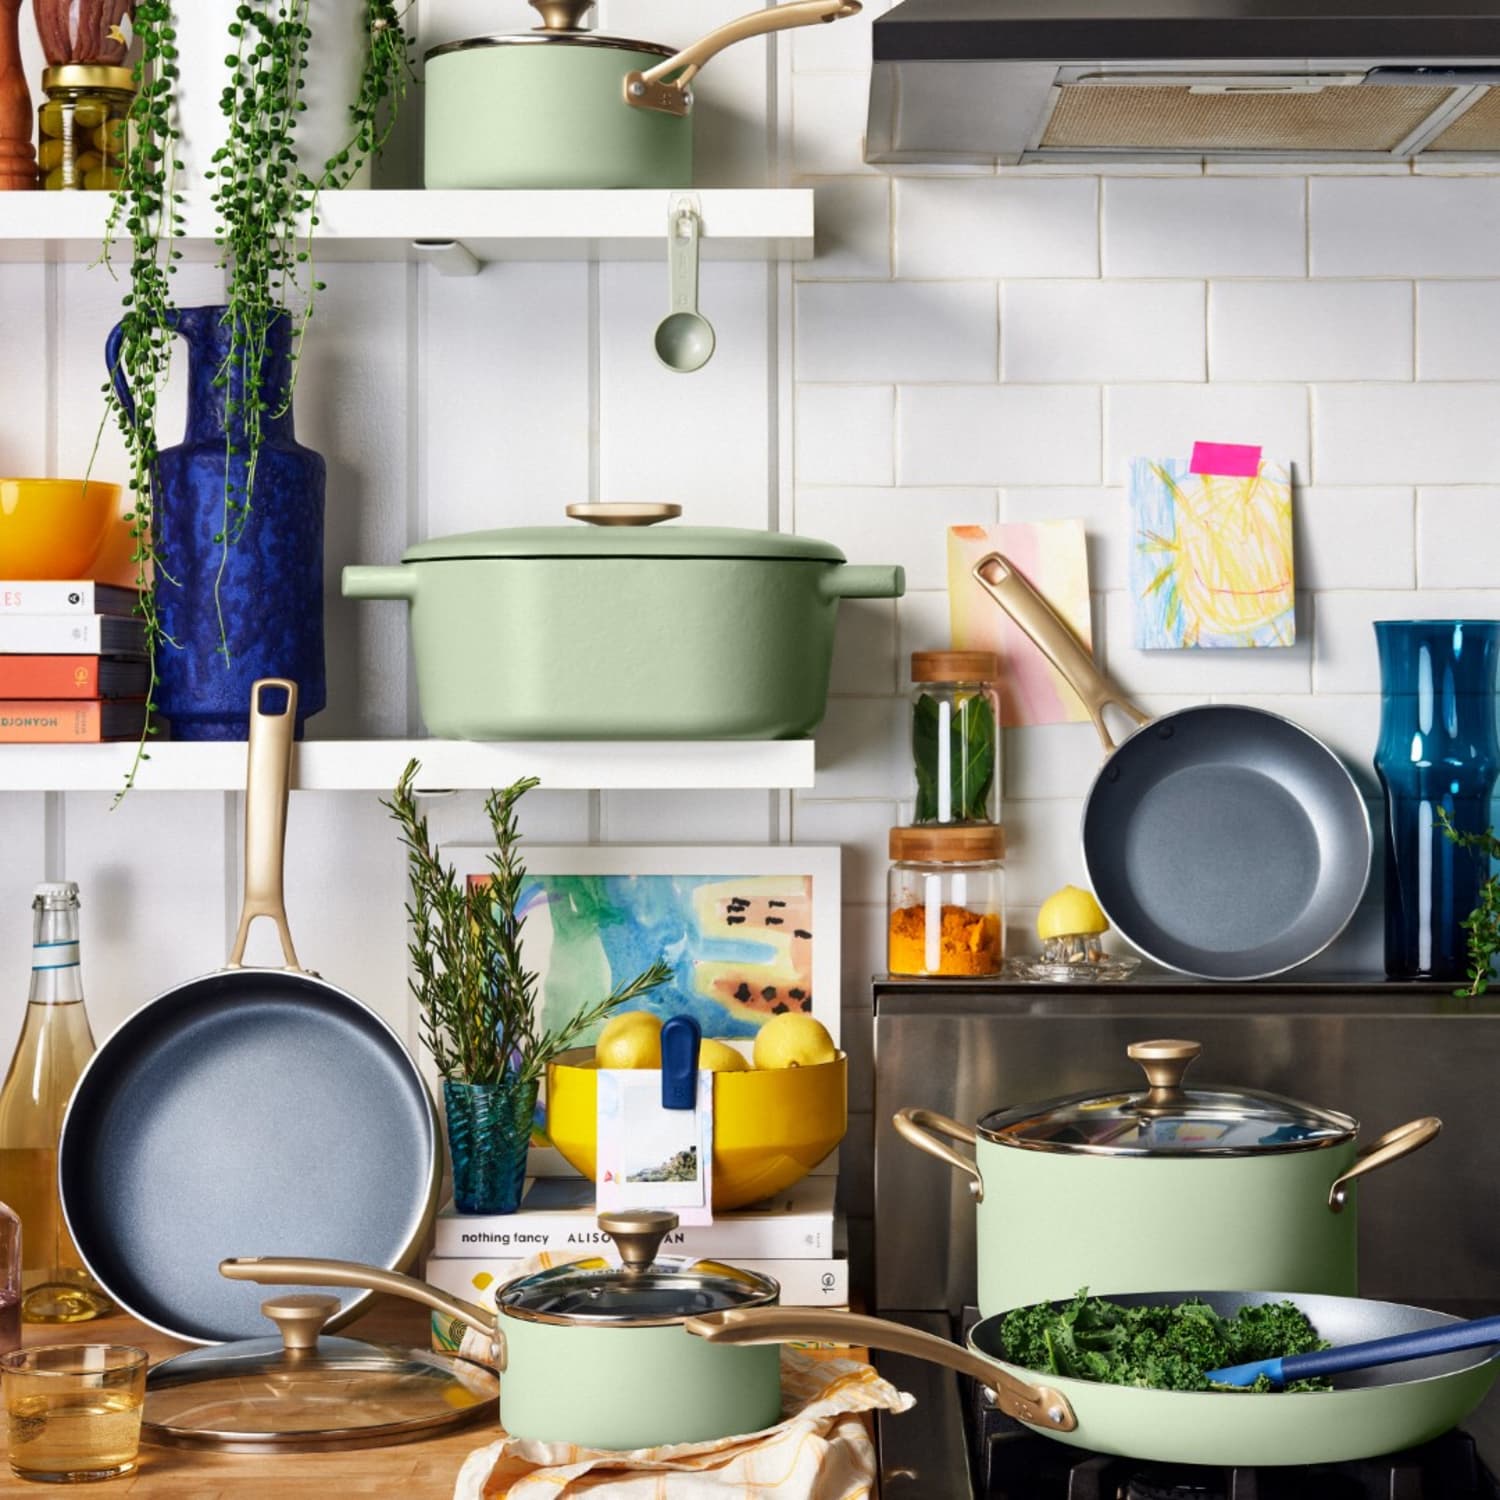 Snag Drew Barrymore's stunning 20-piece cookware set for just $99